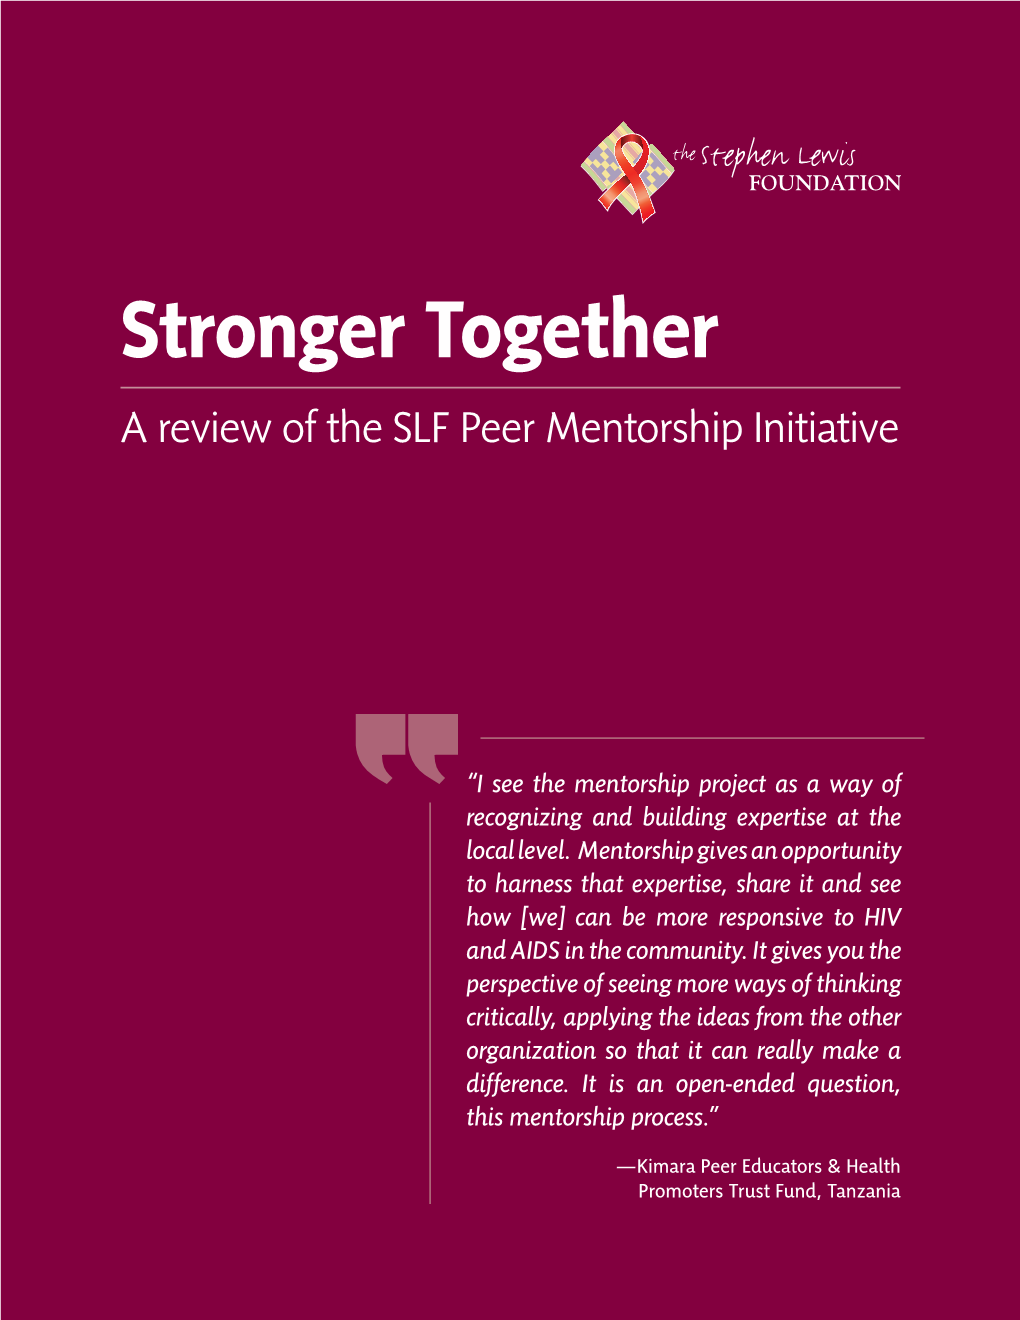 Stronger Together a Review of the SLF Peer Mentorship Initiative